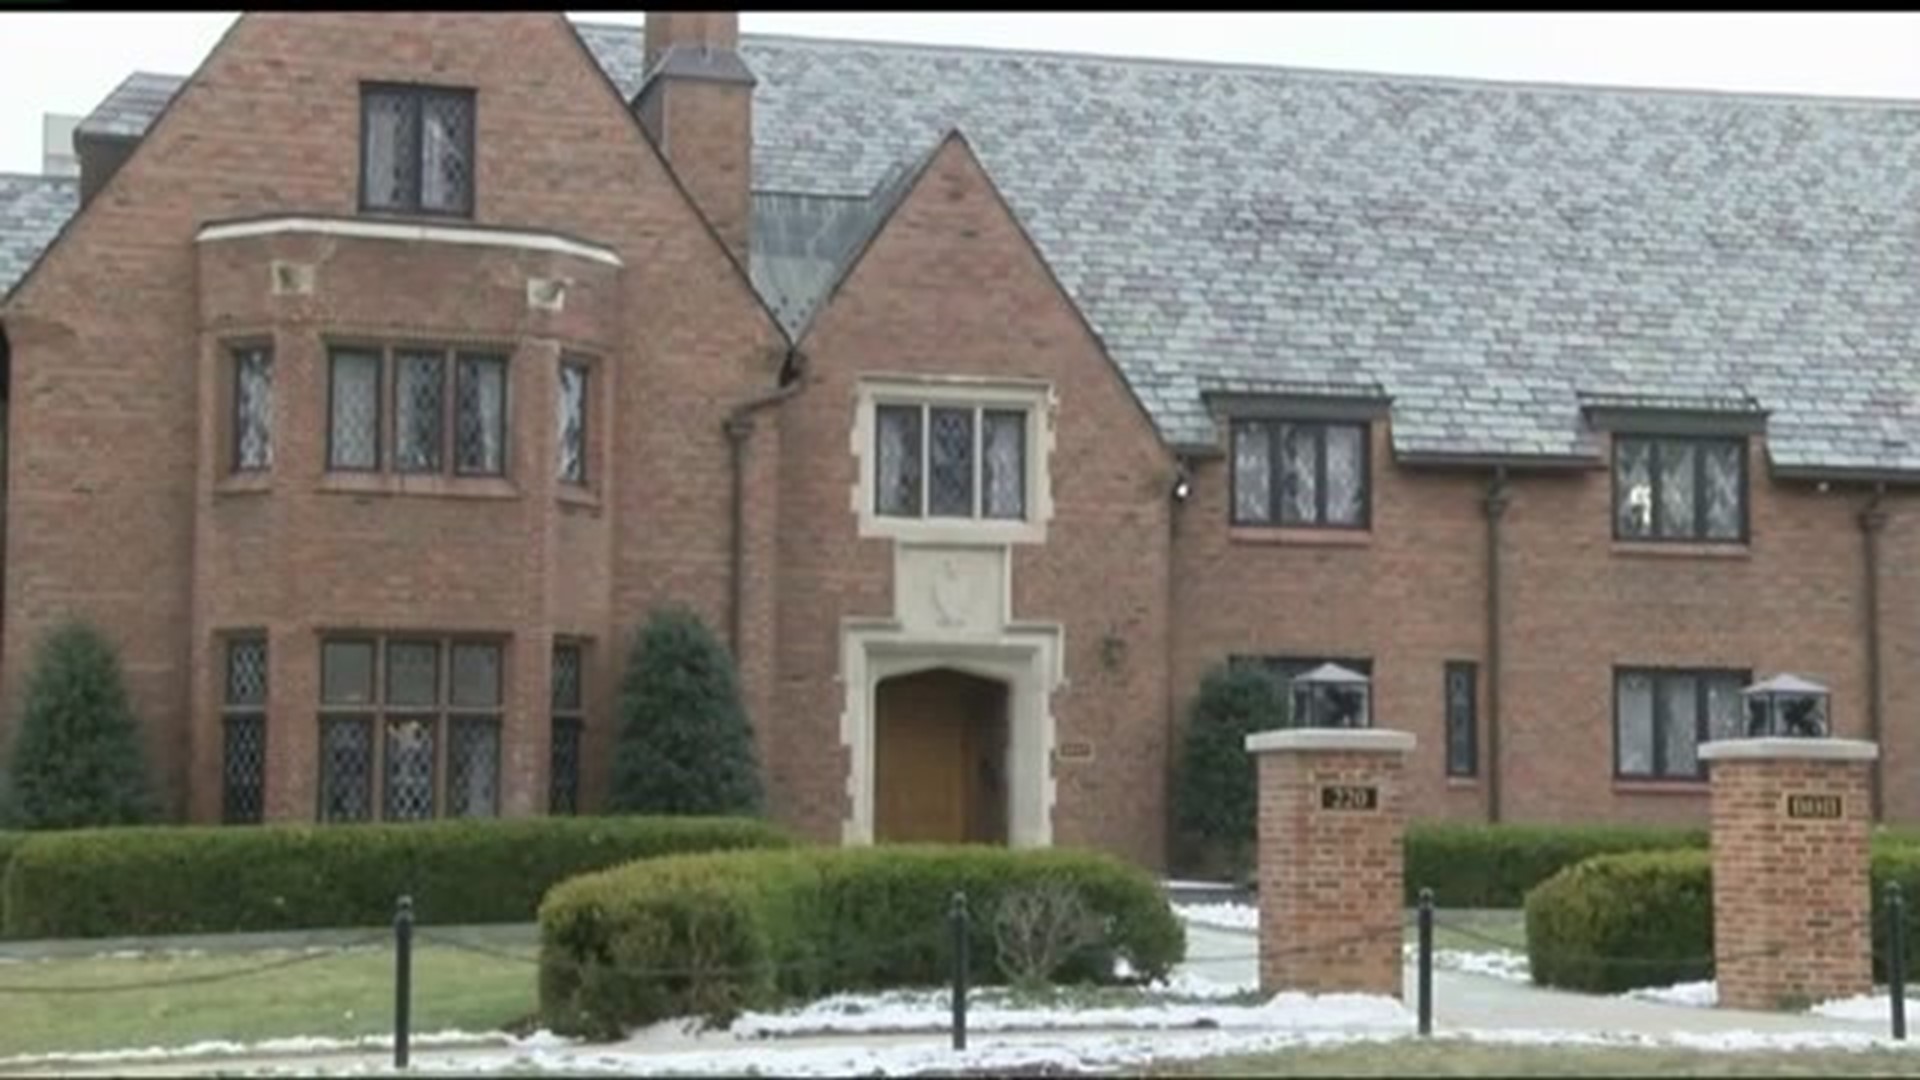 Penn State Revokes Frat Chapter after Student Death, Creates New Rules